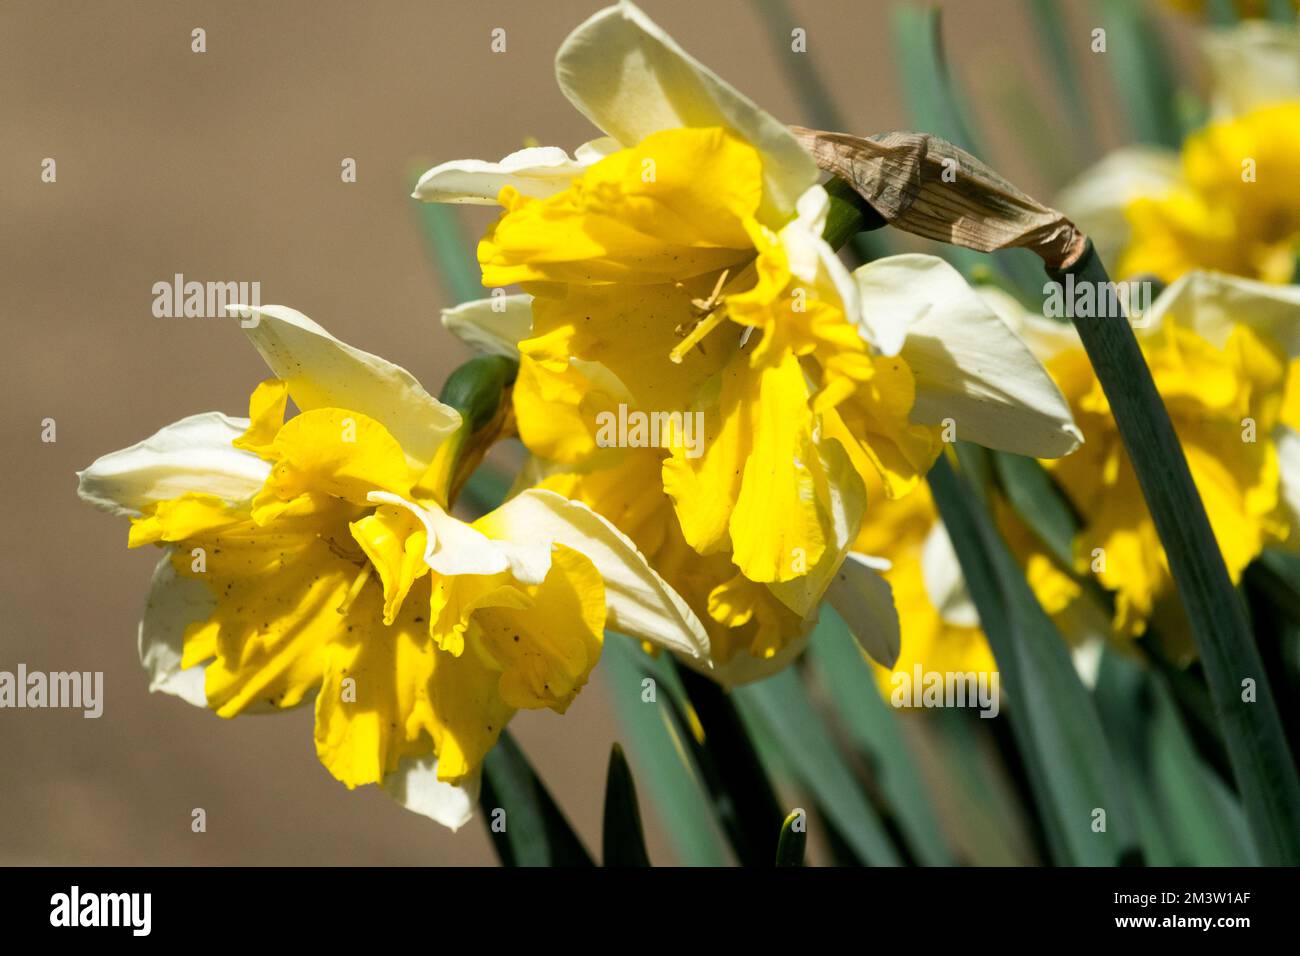 Herbaceous, Daffodils, Spring, Season, Vivid, Flowers, Narcissus 'Orangery', Blooming, Cultivar Stock Photo